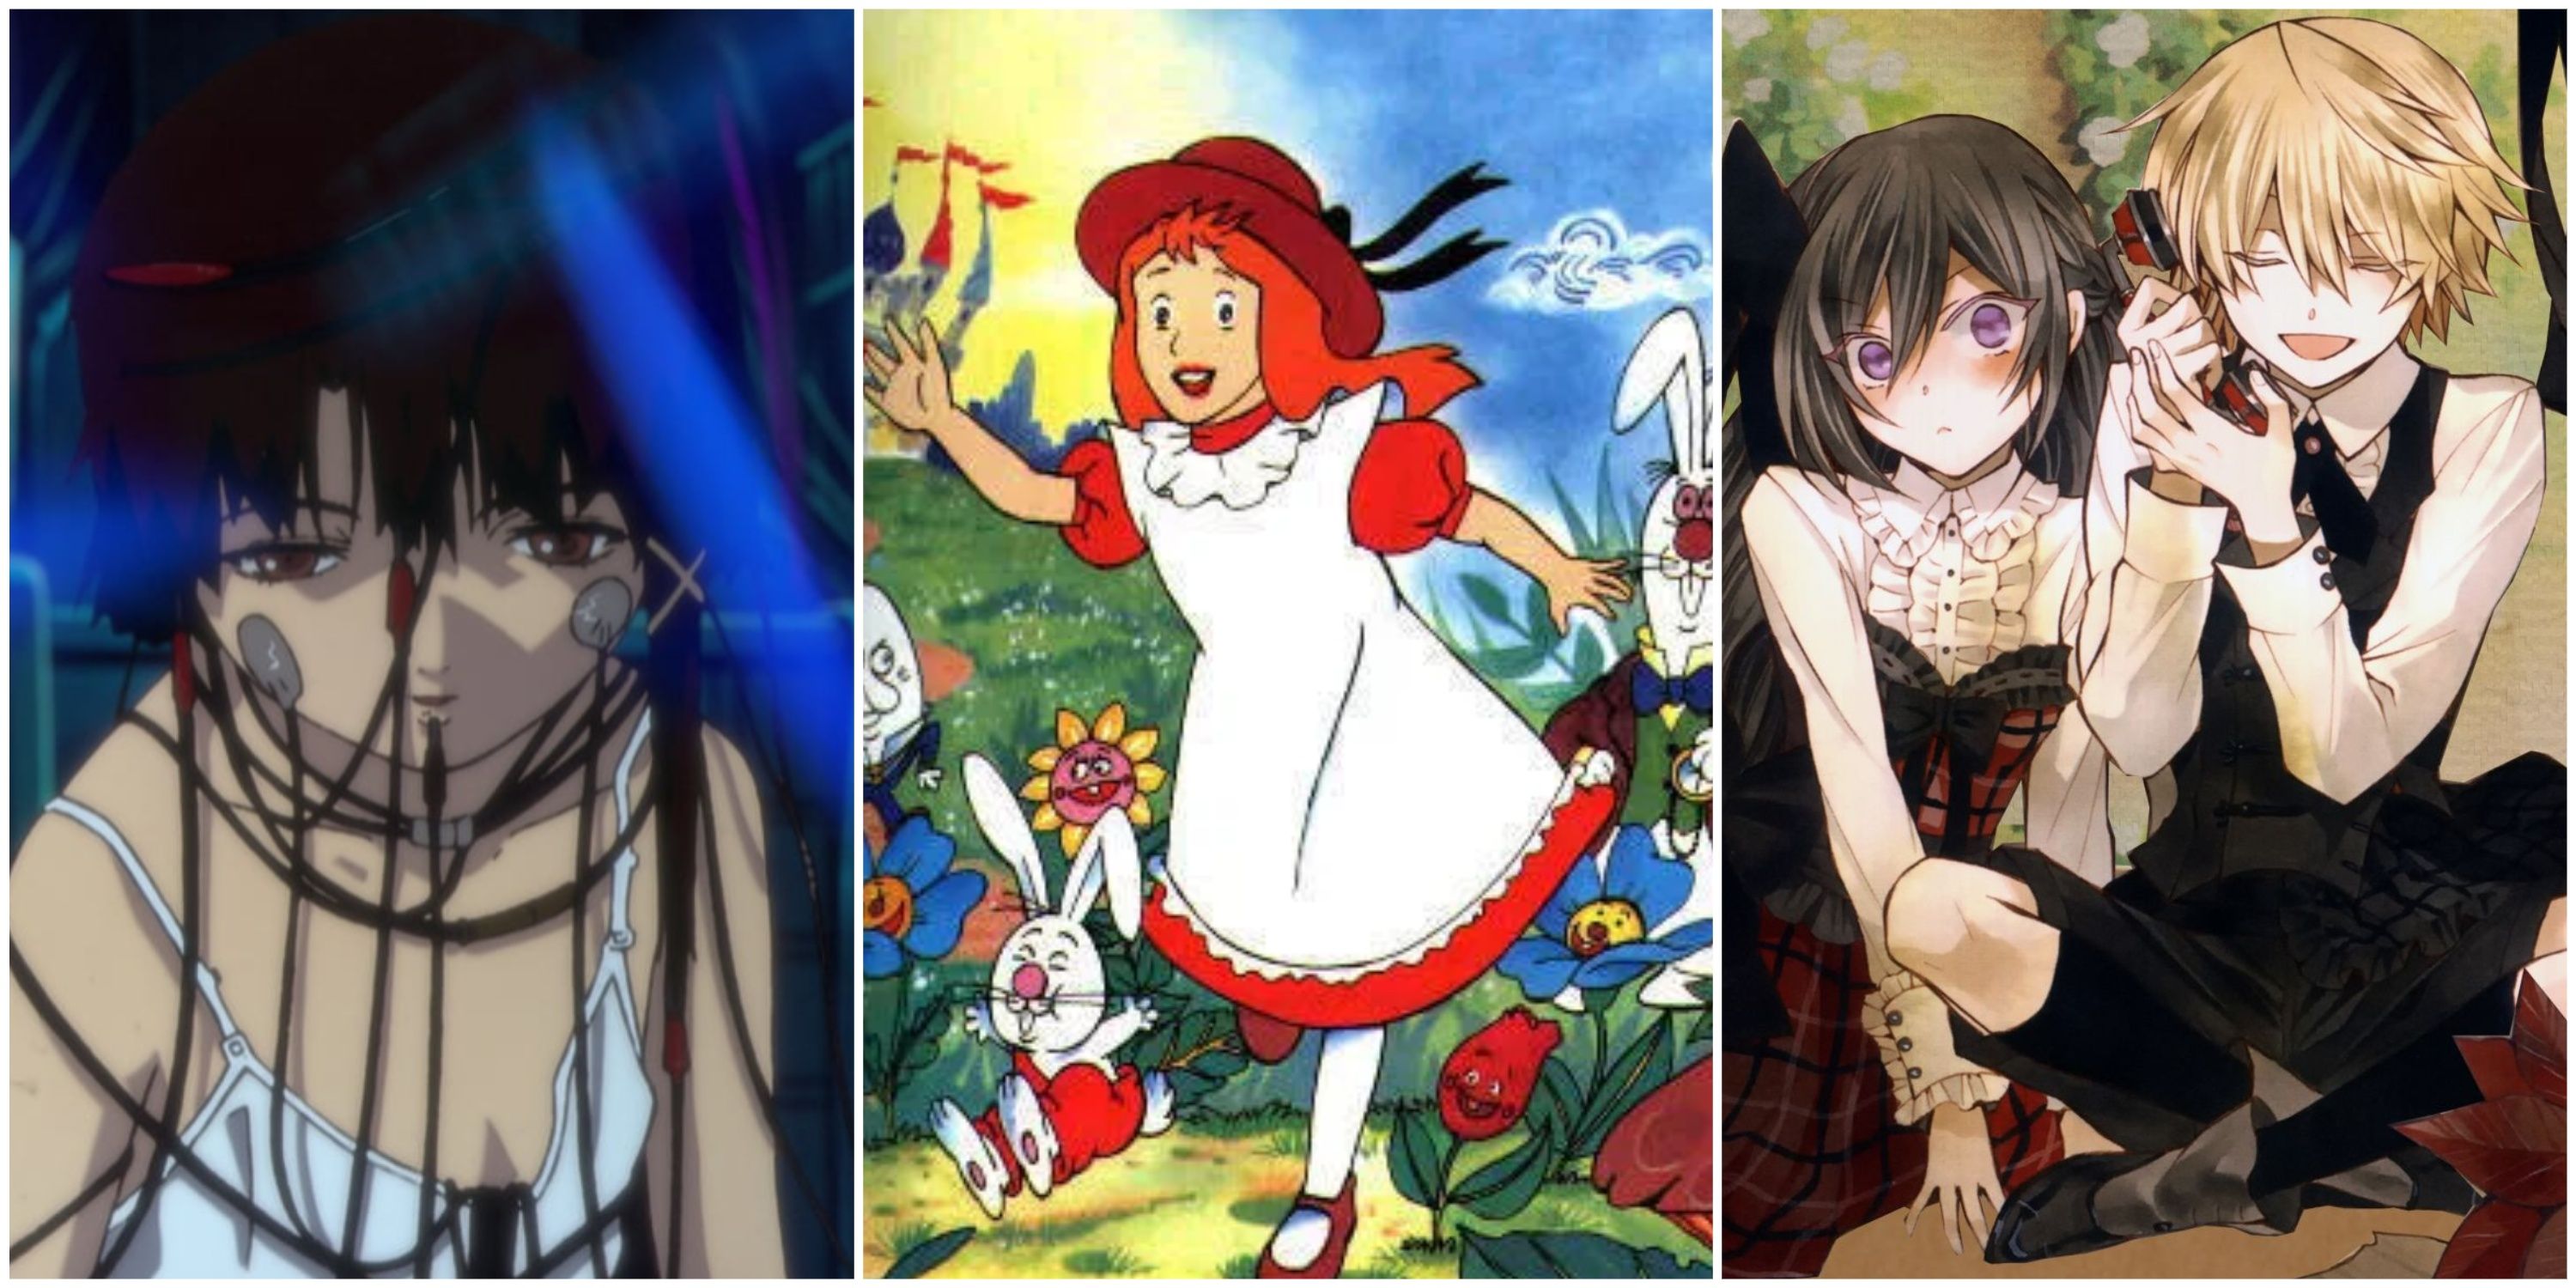 Serial Experiments Lain, Alice in Wonderland, and Pandora Hearts anime